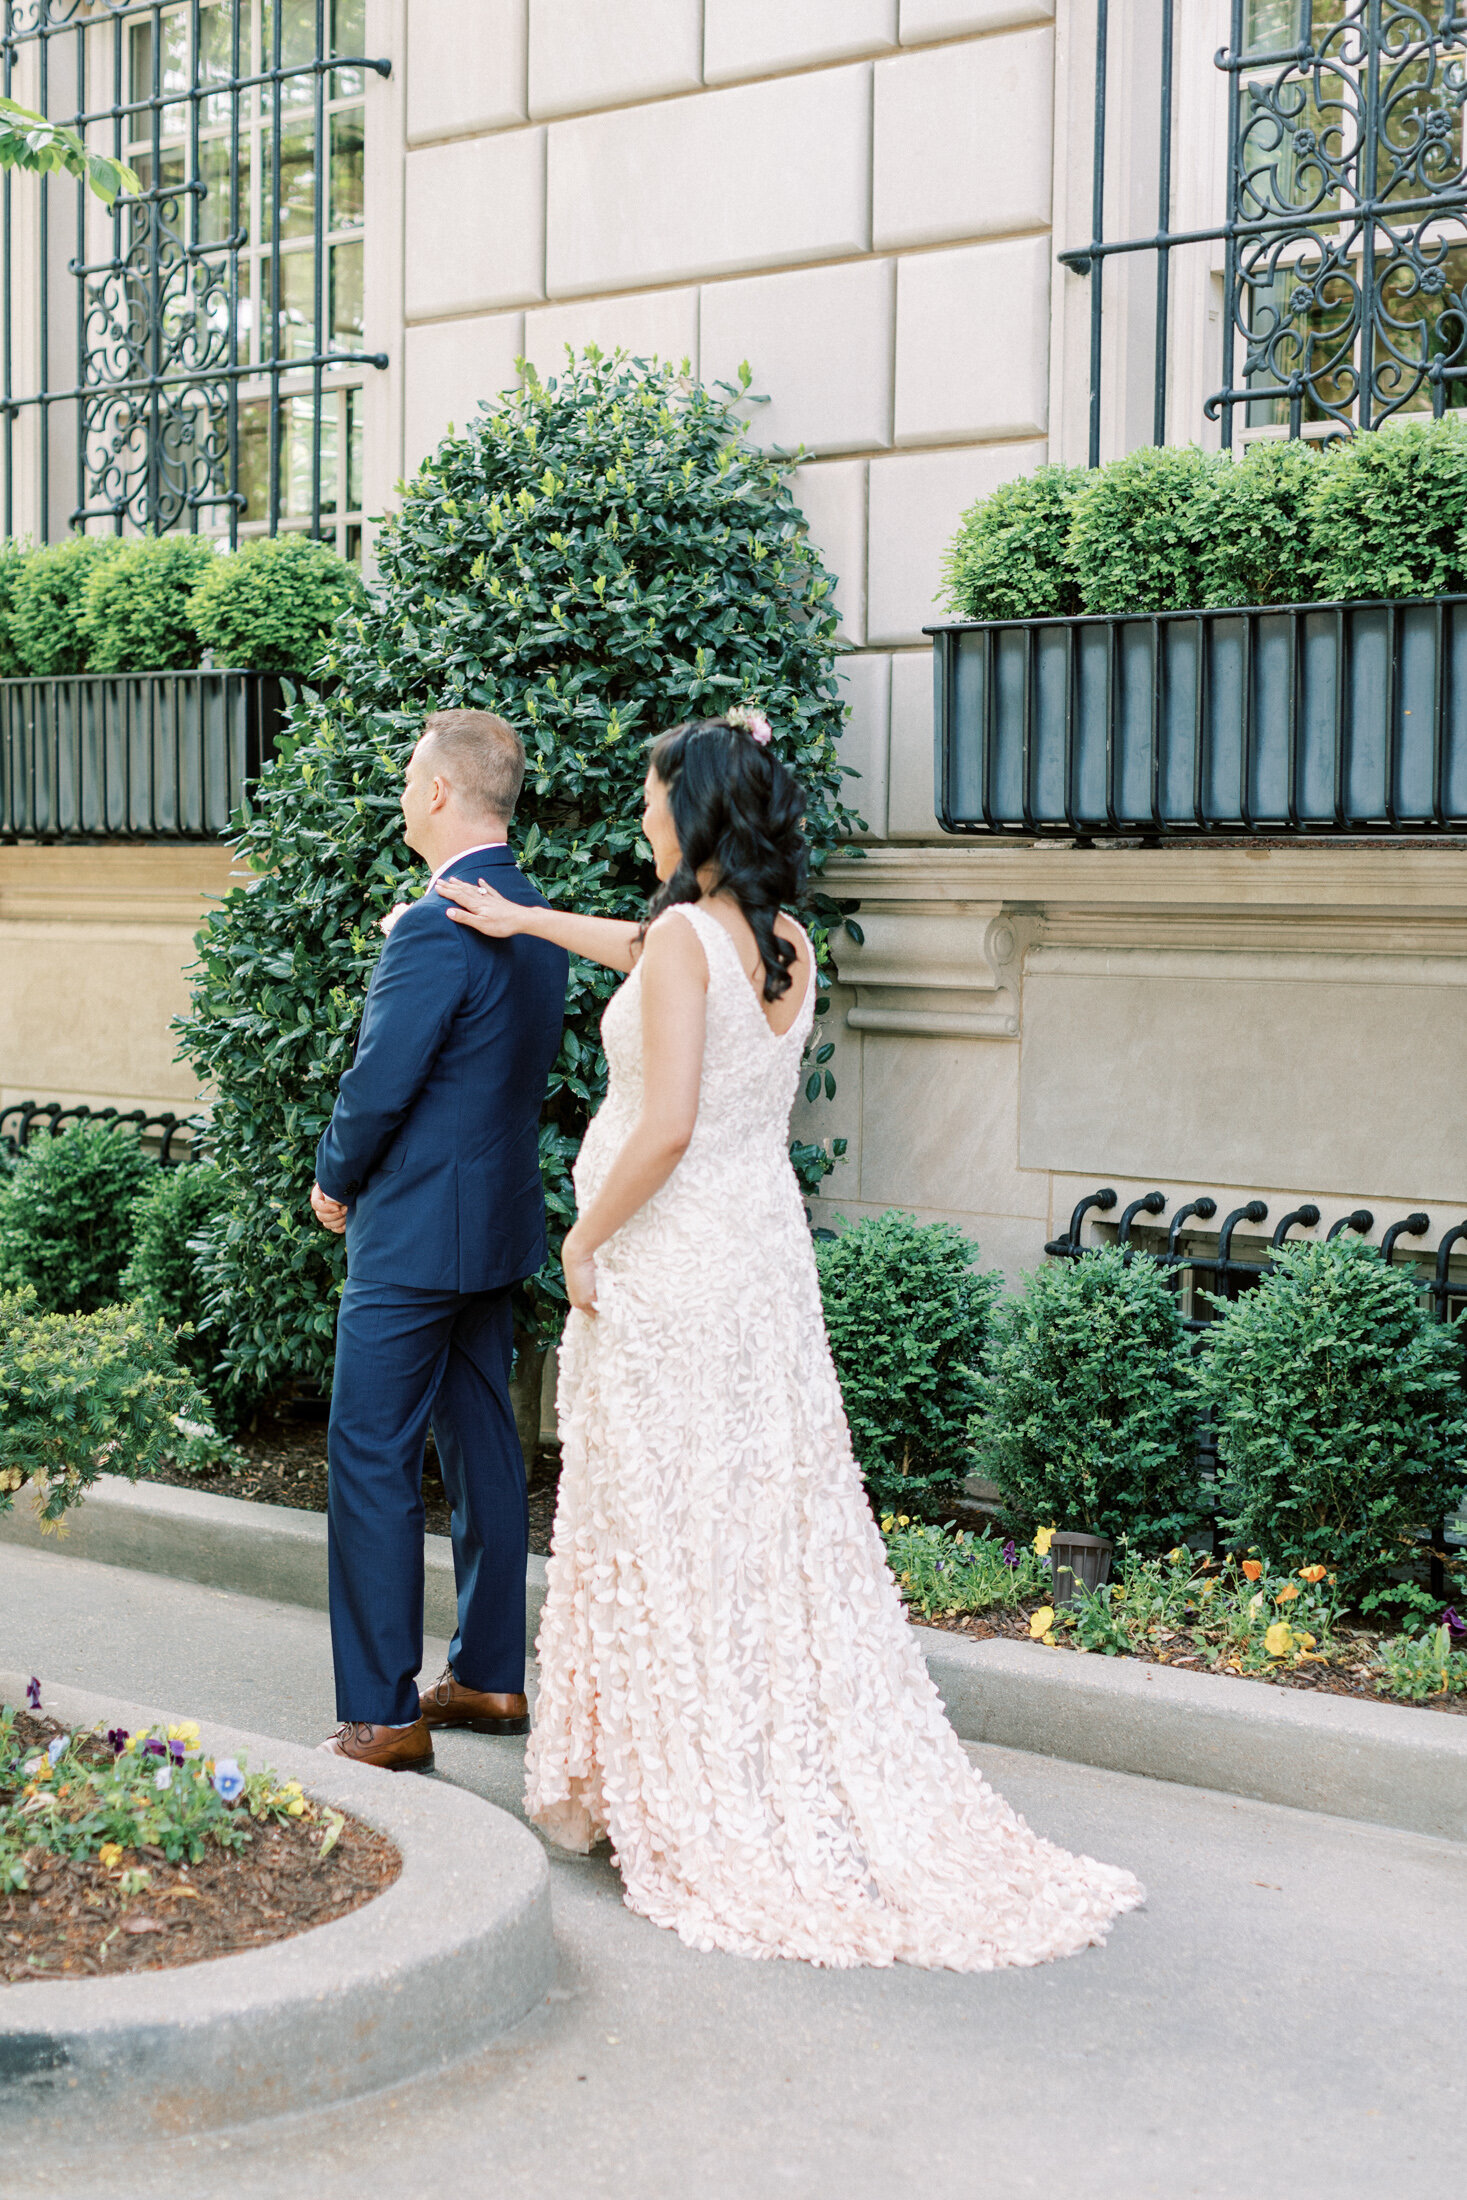 Bride and groom share a first look at the Hay-Adams hotel in DC